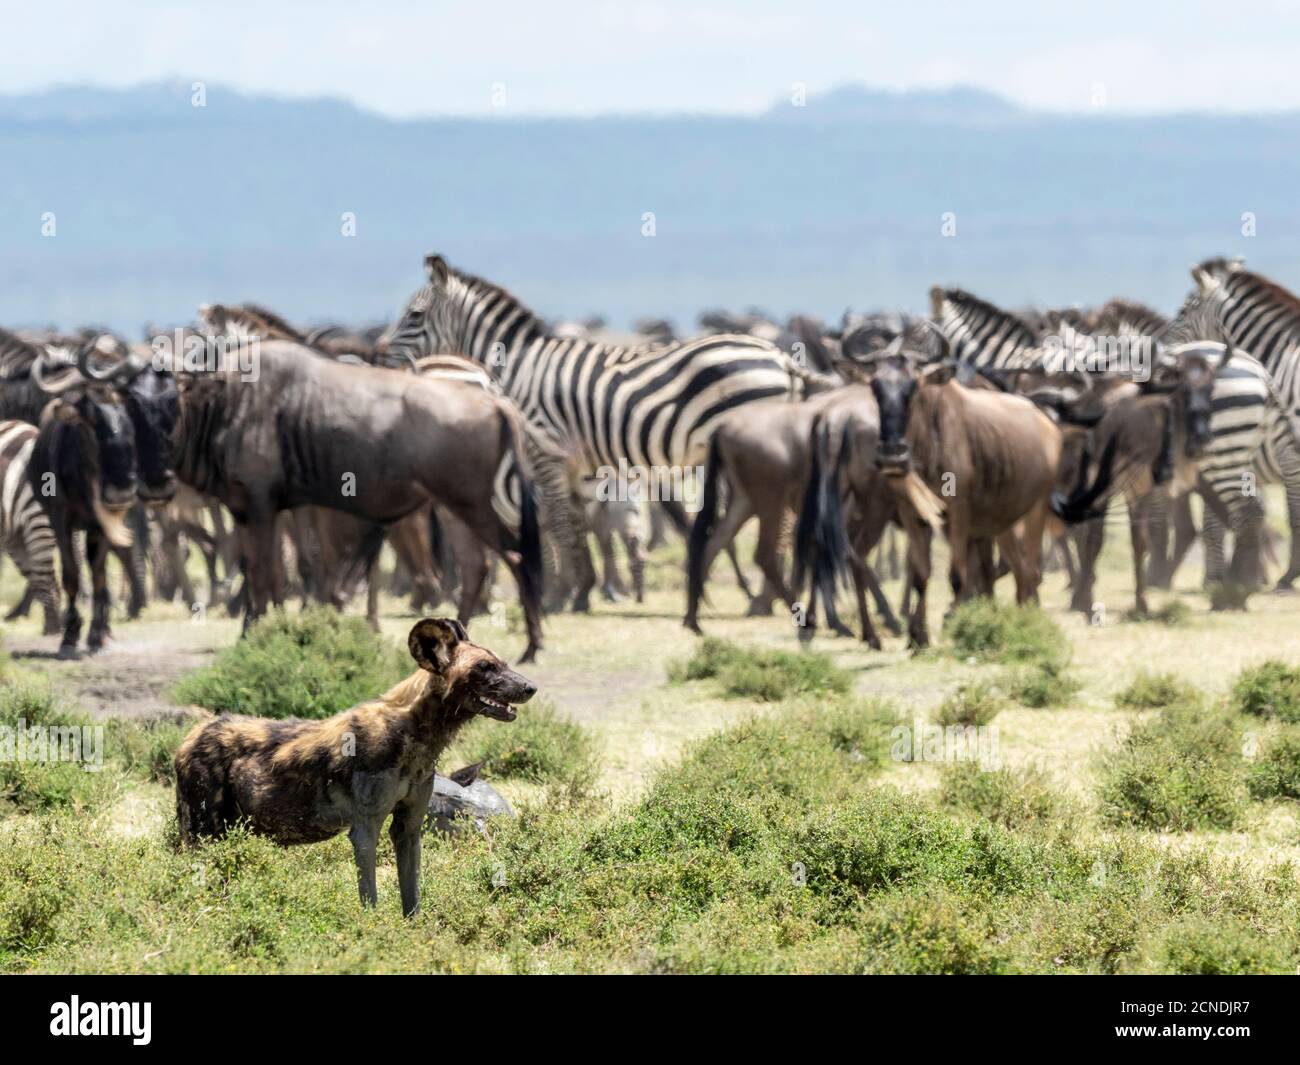 African wild dog (Lycaon pictus), probing zebras and wildebeest in Serengeti National Park, Tanzania, East Africa, Africa Stock Photo